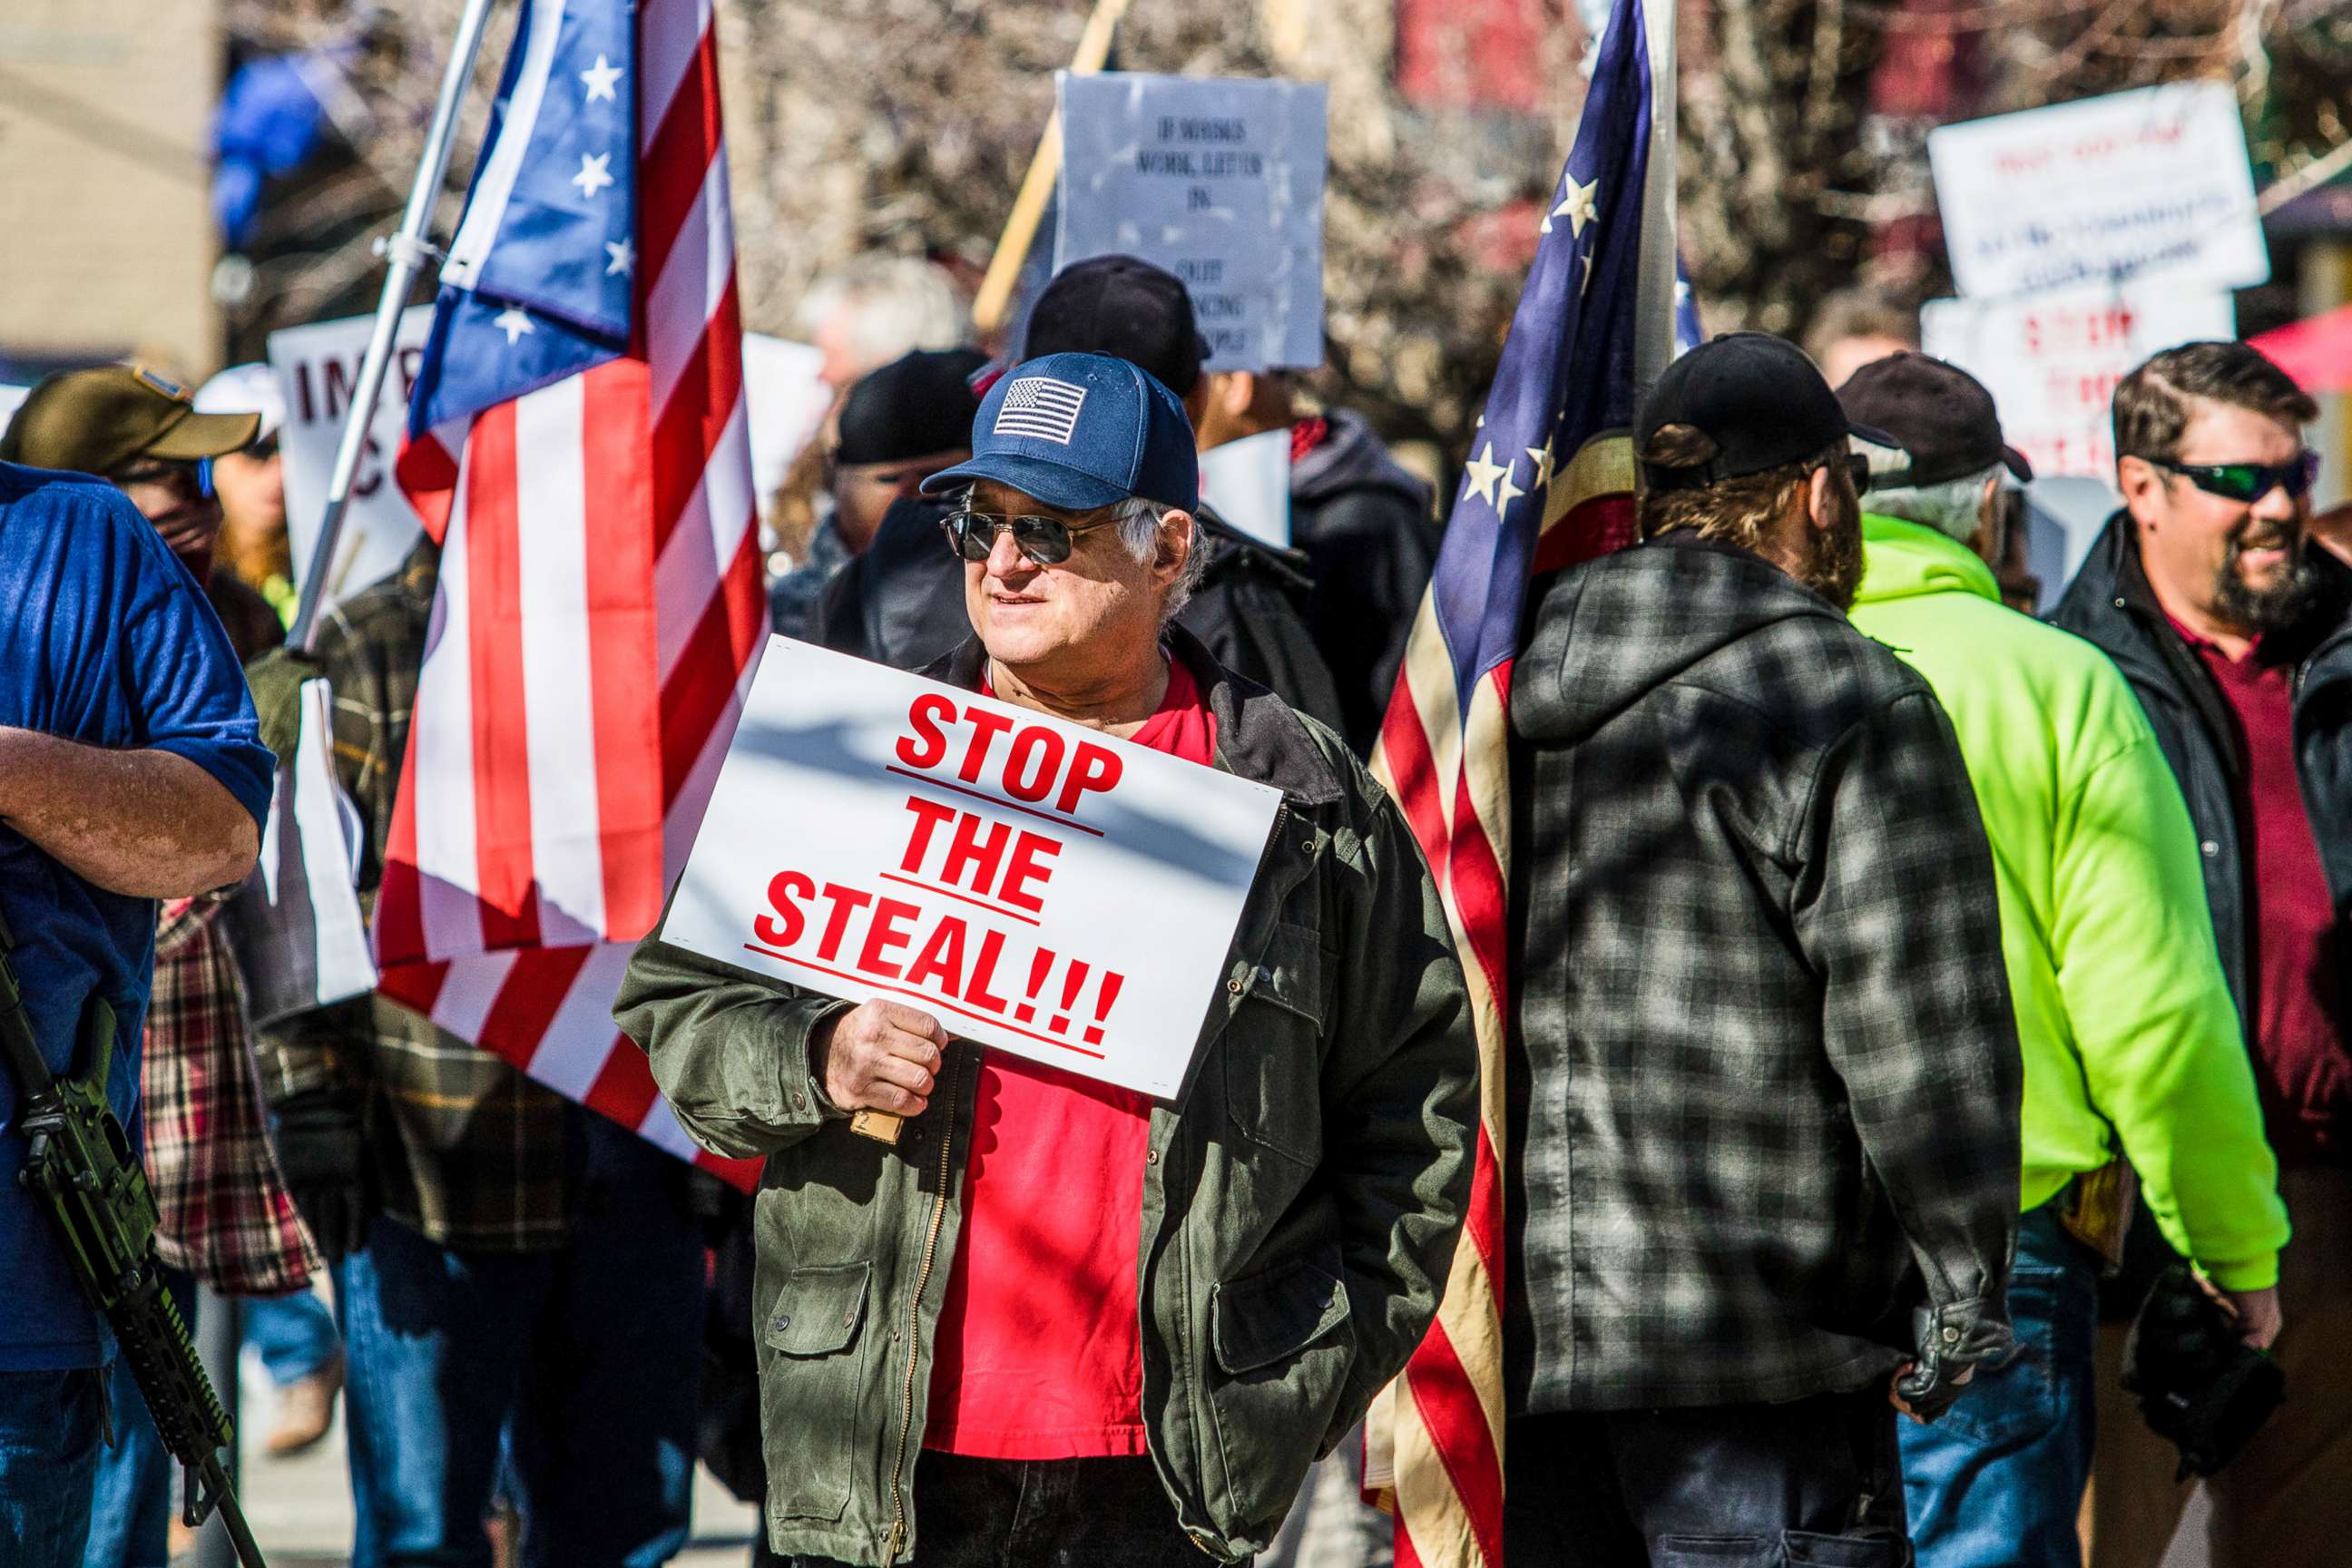 PHOTO: A protestor holds a placard saying Stop the steal during the demonstration at the Nevada state's legislative building in Carson, Nev., Feb 1, 2021.